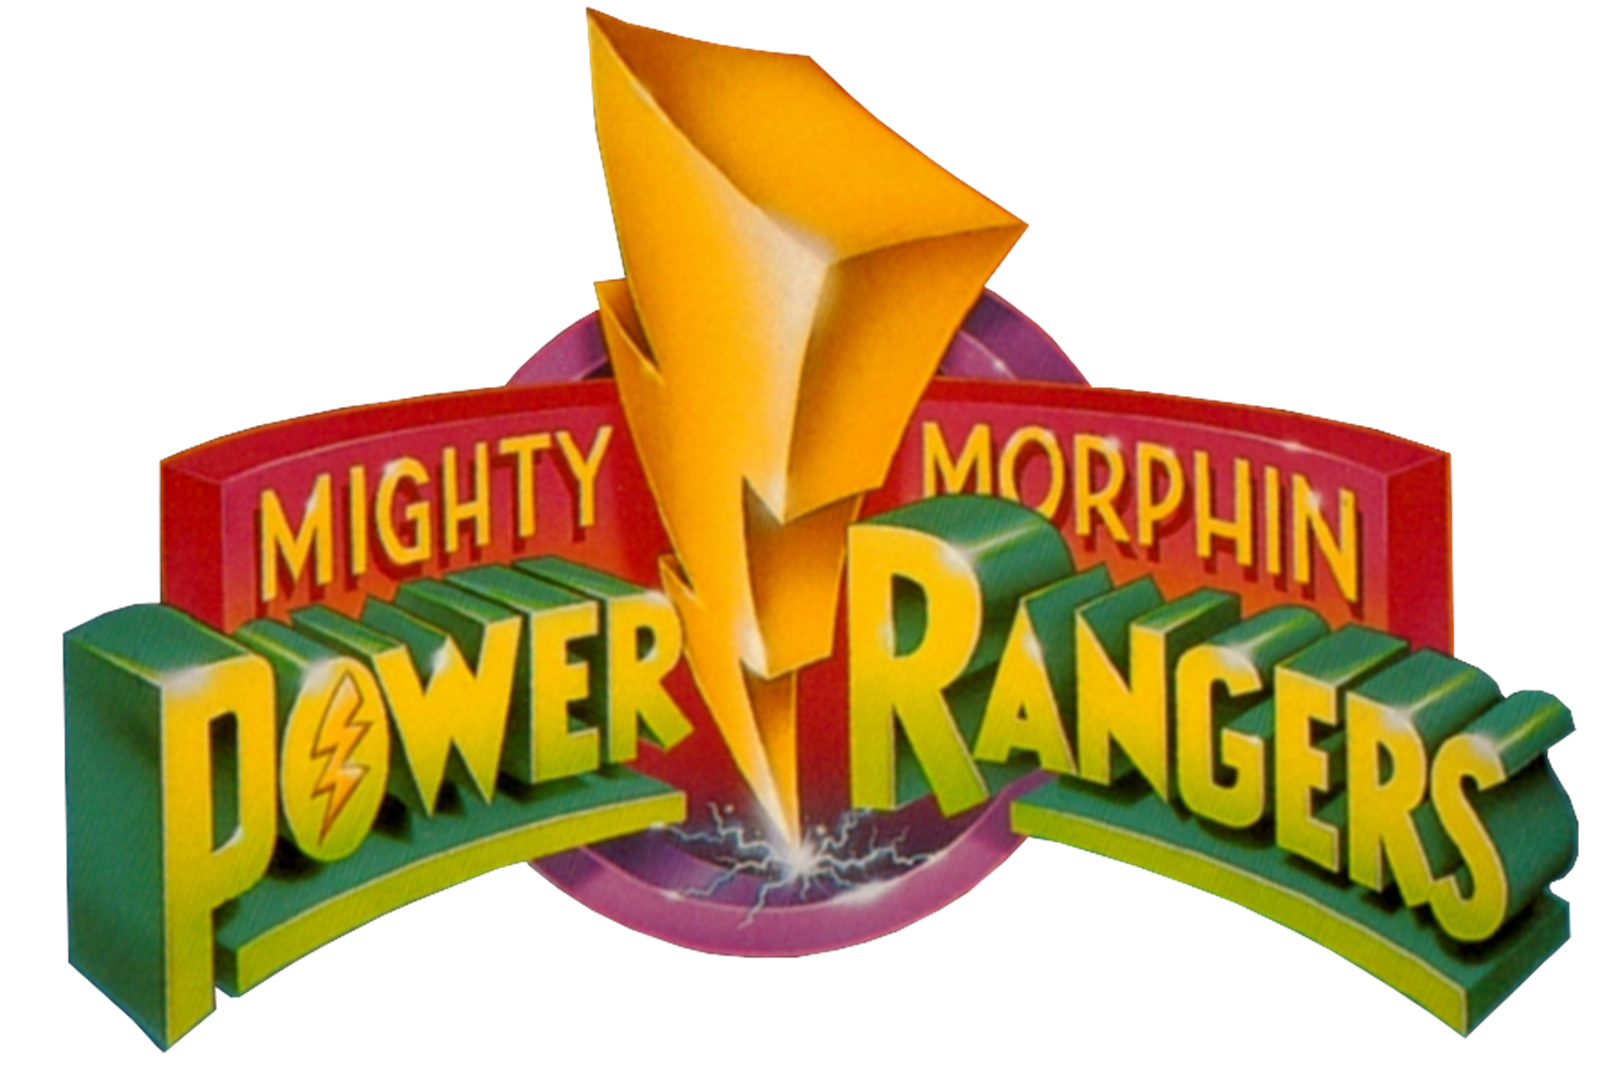 Mighty Morphin Power Rangers comic book collections at Kickstarter